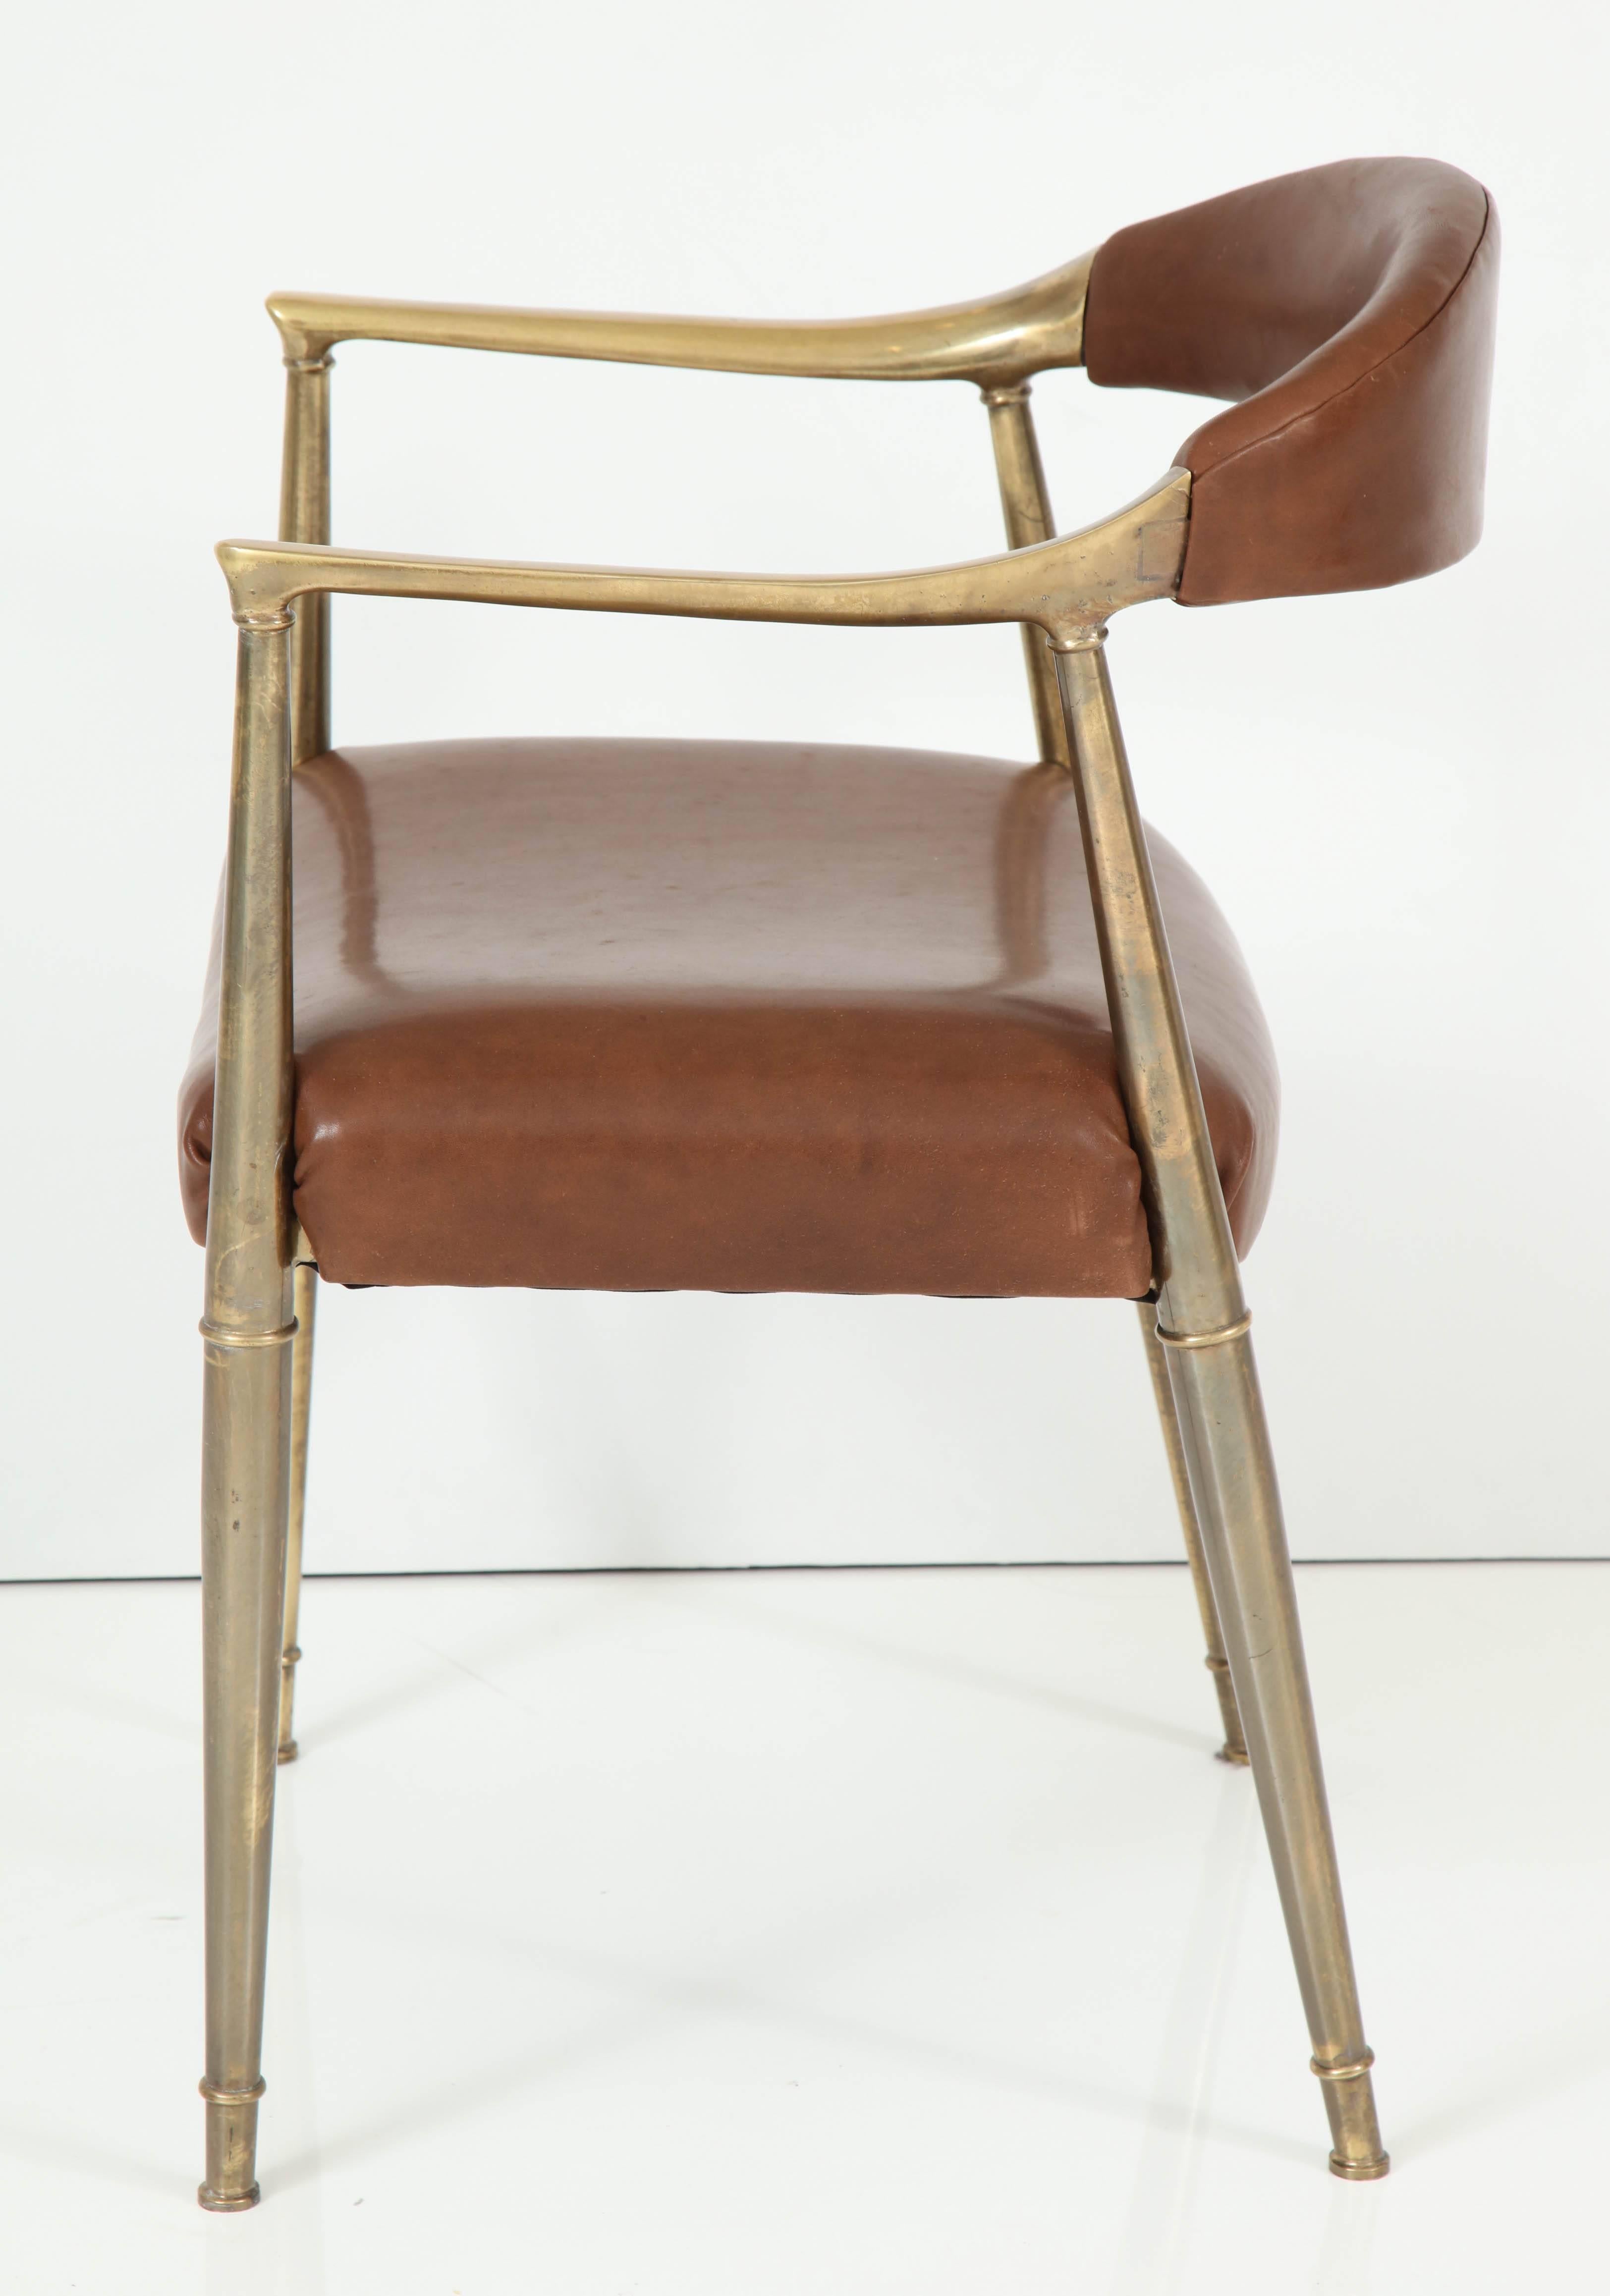 Italian Brass Armchair in Saddle Leather In Good Condition For Sale In New York, NY